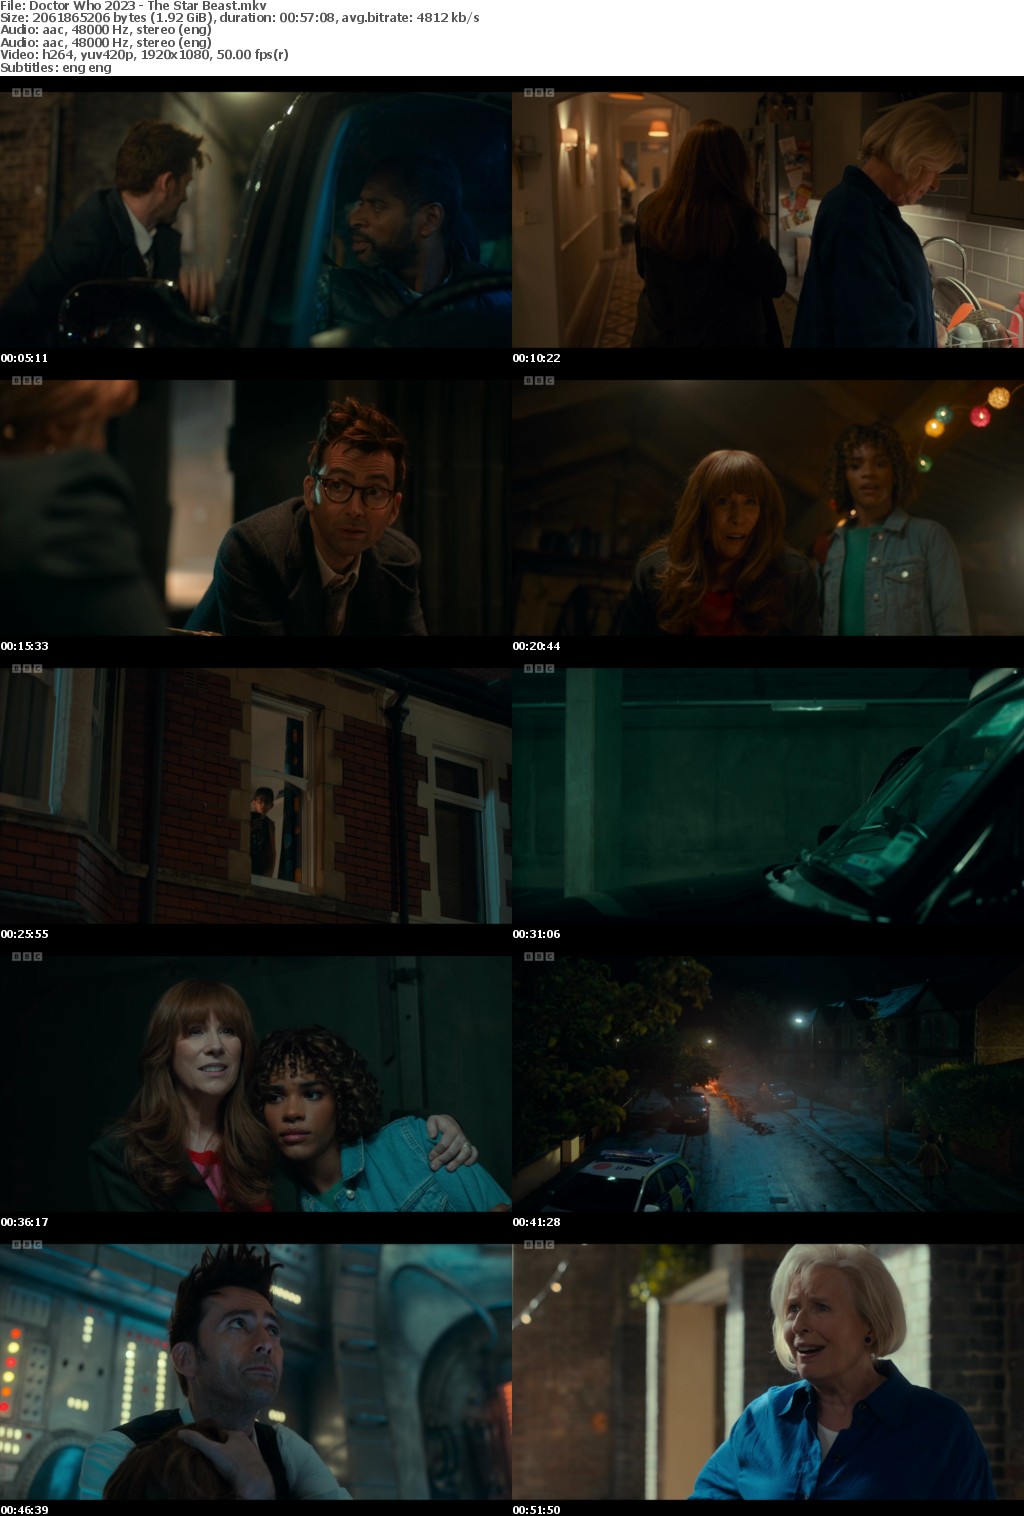 Doctor Who 2023 - The Star Beast (w Commentary Track) WEB 1080p H 264 AnimeChap